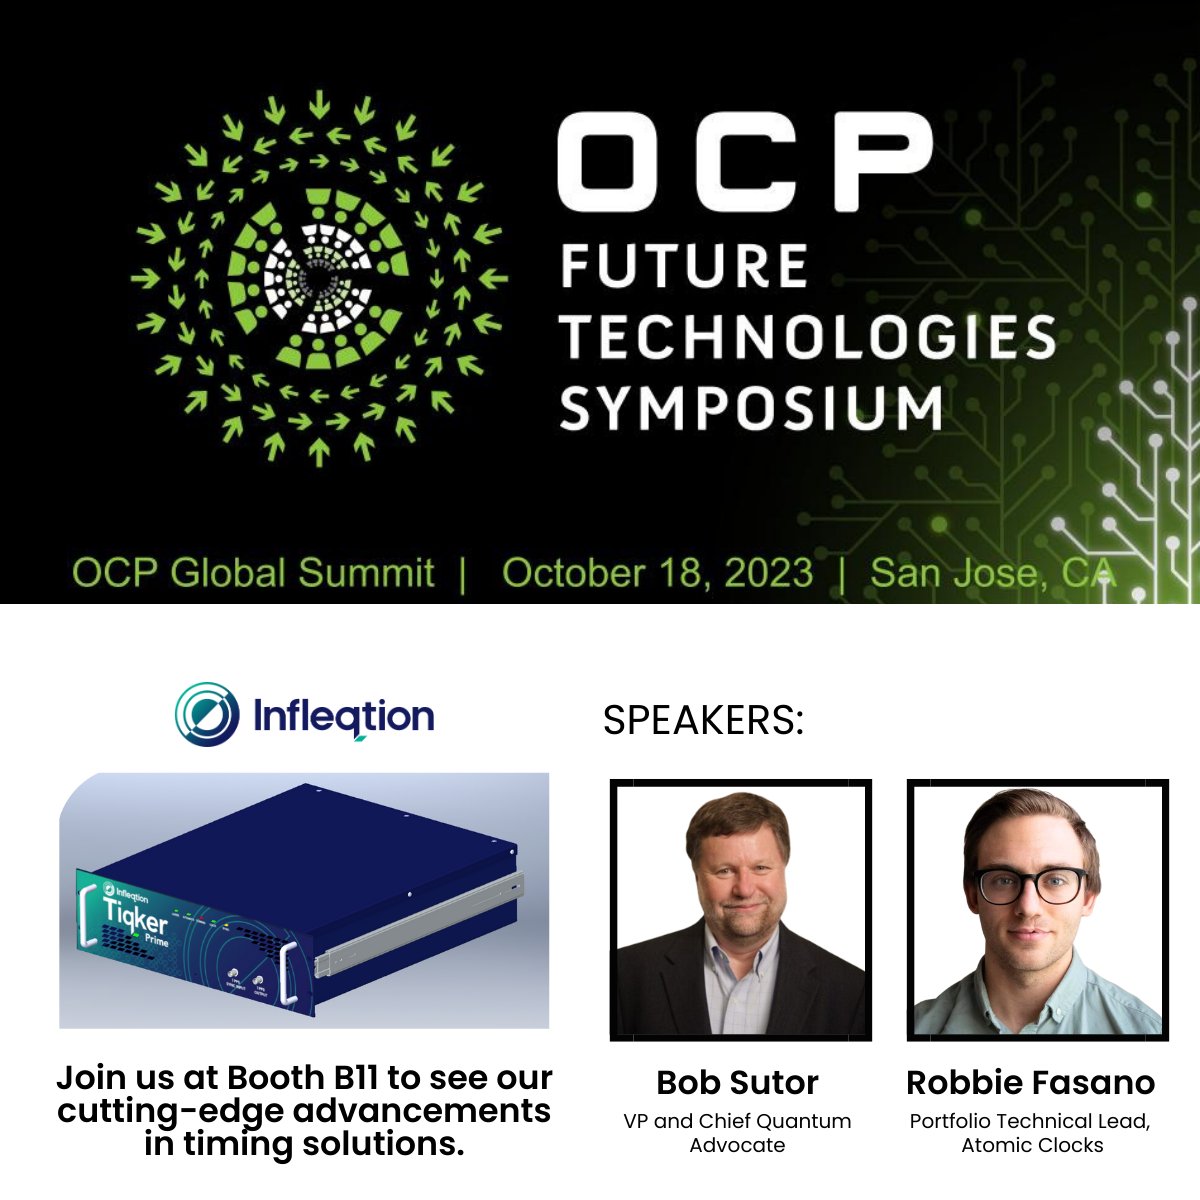 We hope to see you at this year's OCP Global Summit and Future Technologies Symposium, where we will showcase our cutting-edge advancements in timing solutions, known as #Tiqker, at booth B11. #OCPSummit23